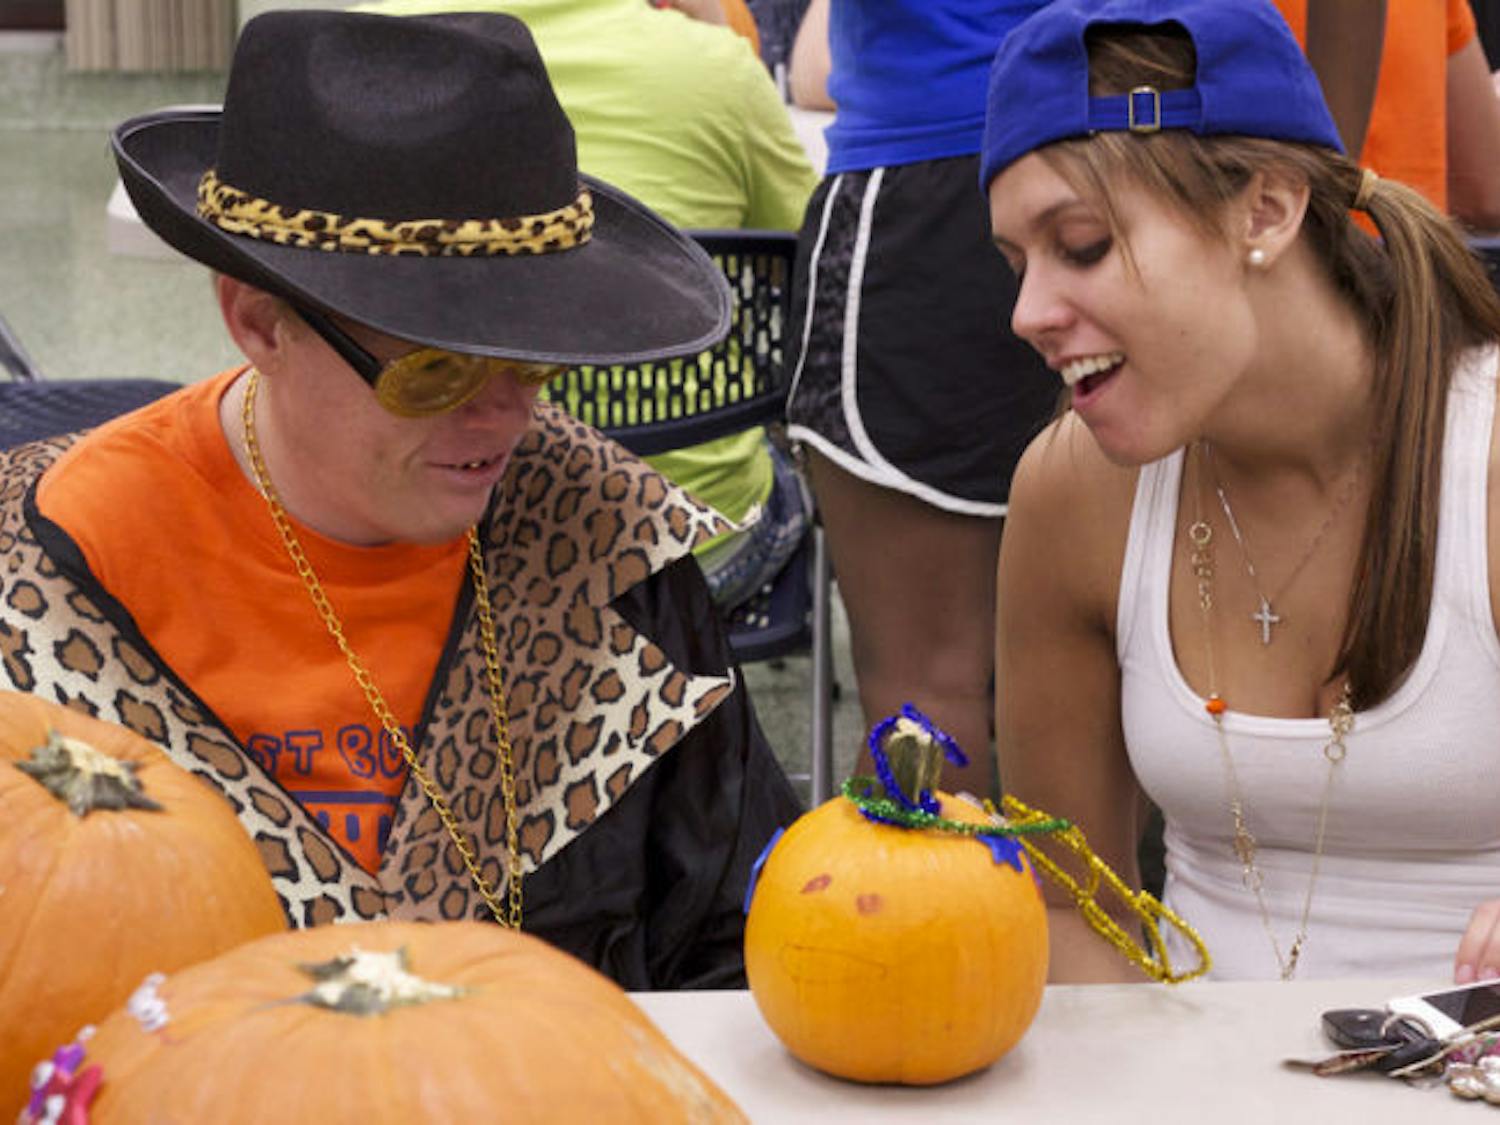 UF criminology freshman Deirdre Pearsall, 18, helps Gainesville resident Chris Brown, 34, decorate a pumpkin for the party hosted by Best Buddies at the Broward Hall Basement on Wednesday evening.